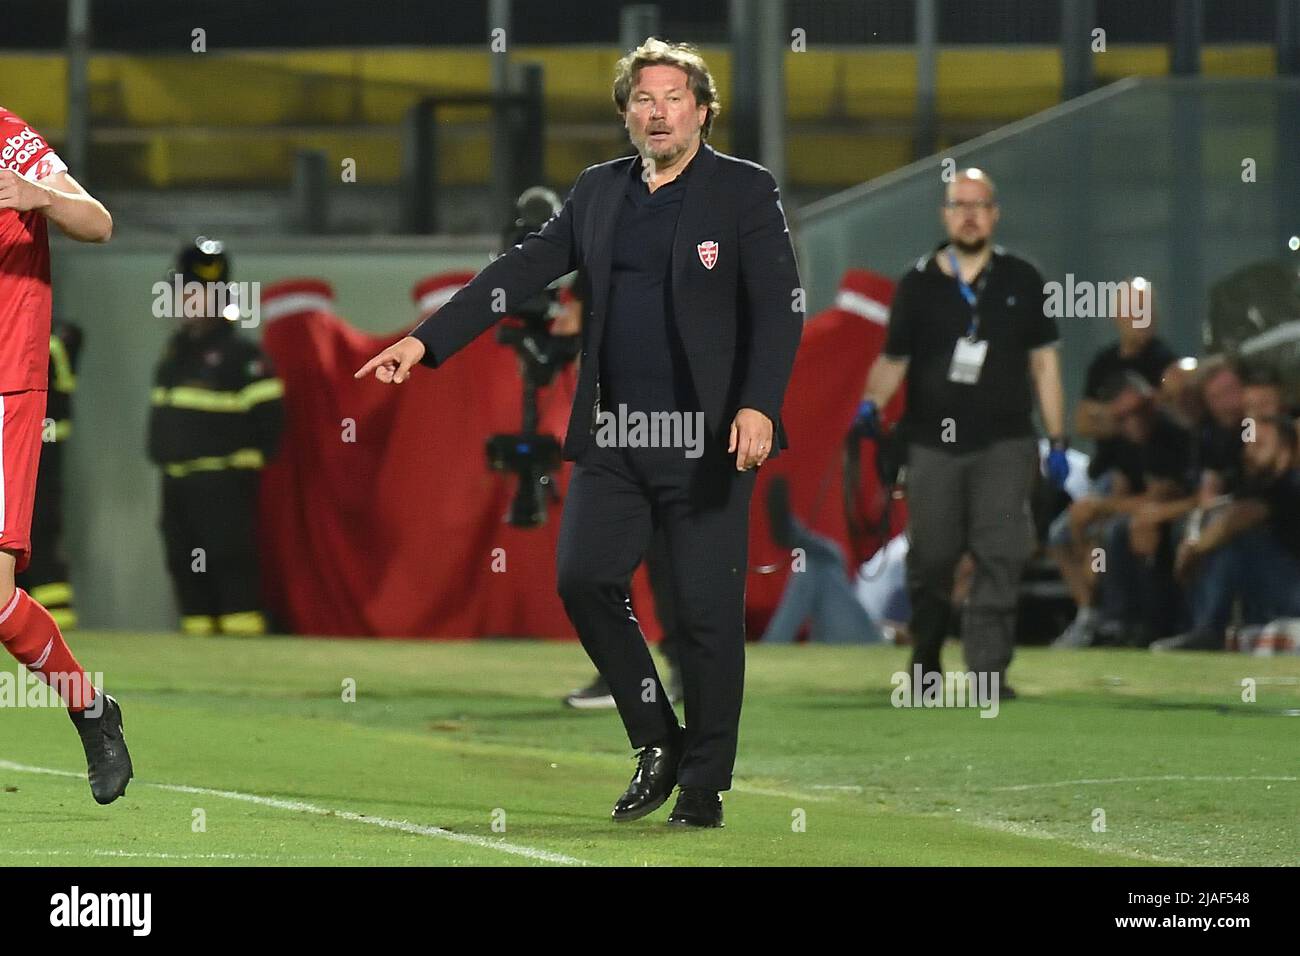 Pisa, Italy. 29th May, 2022. Head coach of Monza Giovanni Stroppa during Play Off - AC Pisa vs AC Monza, Italian soccer Serie B match in Pisa, Italy, May 29 2022 Credit: Independent Photo Agency/Alamy Live News Stock Photo